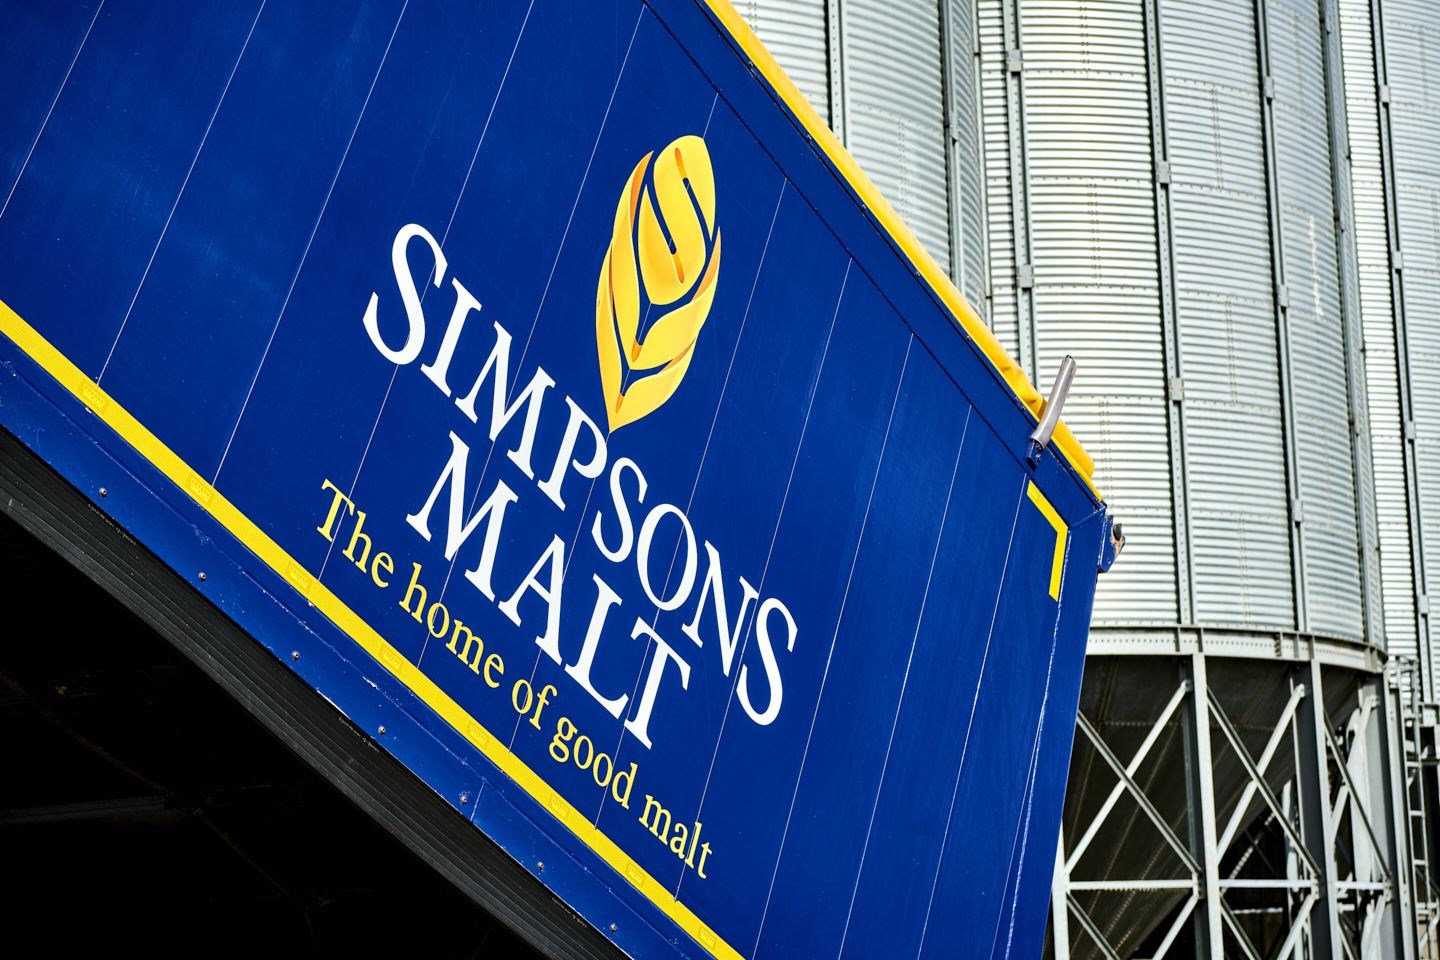 Simpsons Malt Limited has been created planning permission in principle to build on the site.